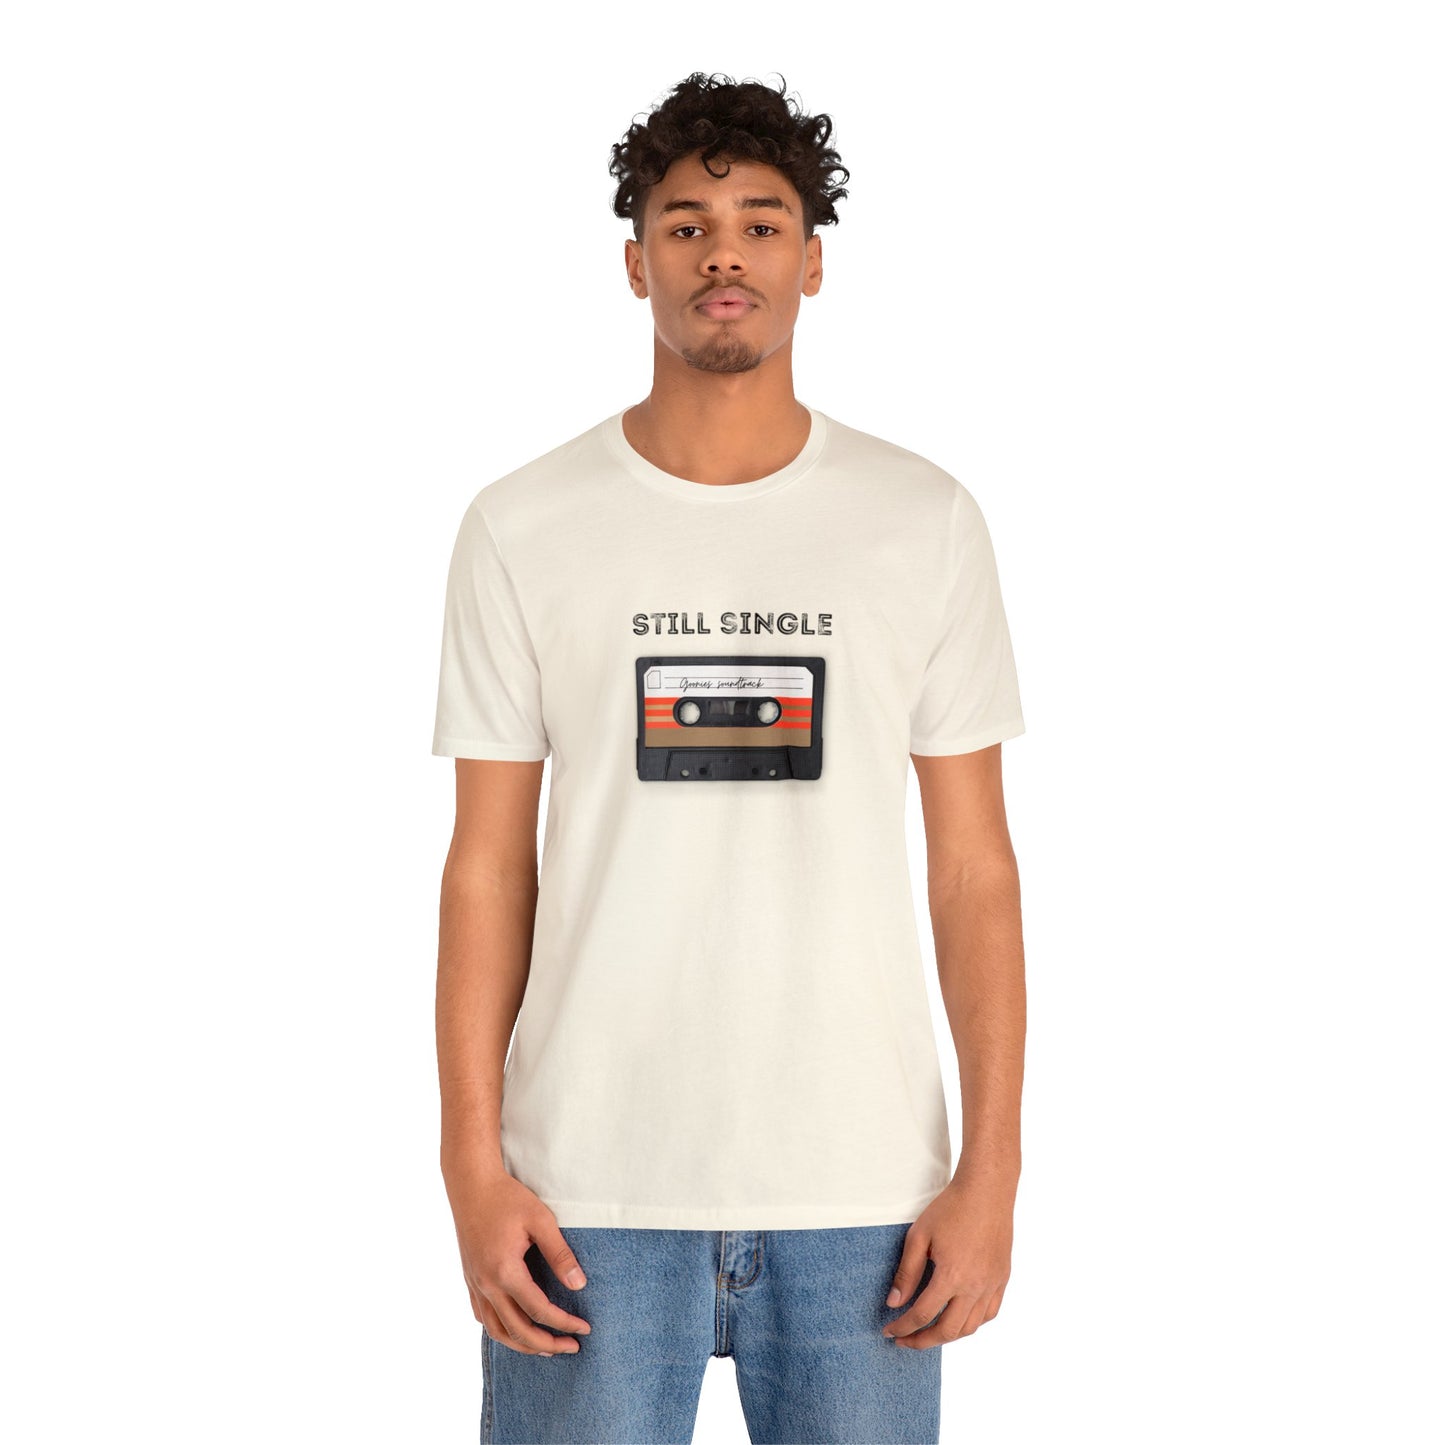 Mixed tape "Still single" quote // Cute and trendy 80's tee